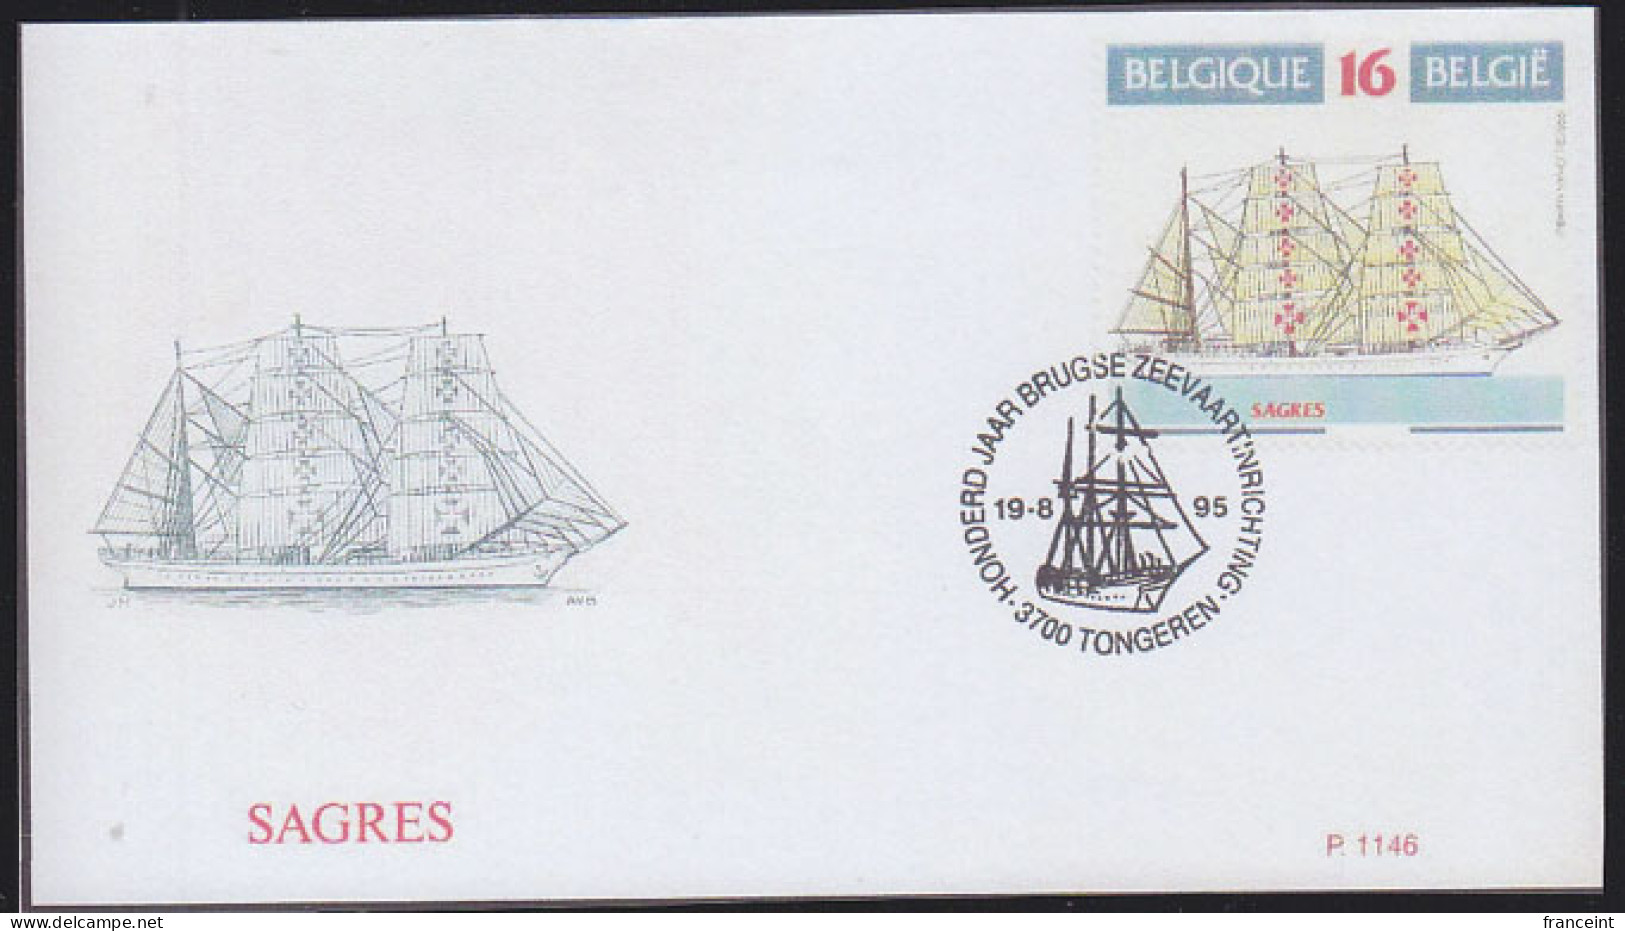 BELGIUM(1992) Sailing Ship Sagres. Die Proof In Green Signed By The Engraver, Representing The FDC Cachet. Scott No 1592 - Proeven & Herdruk